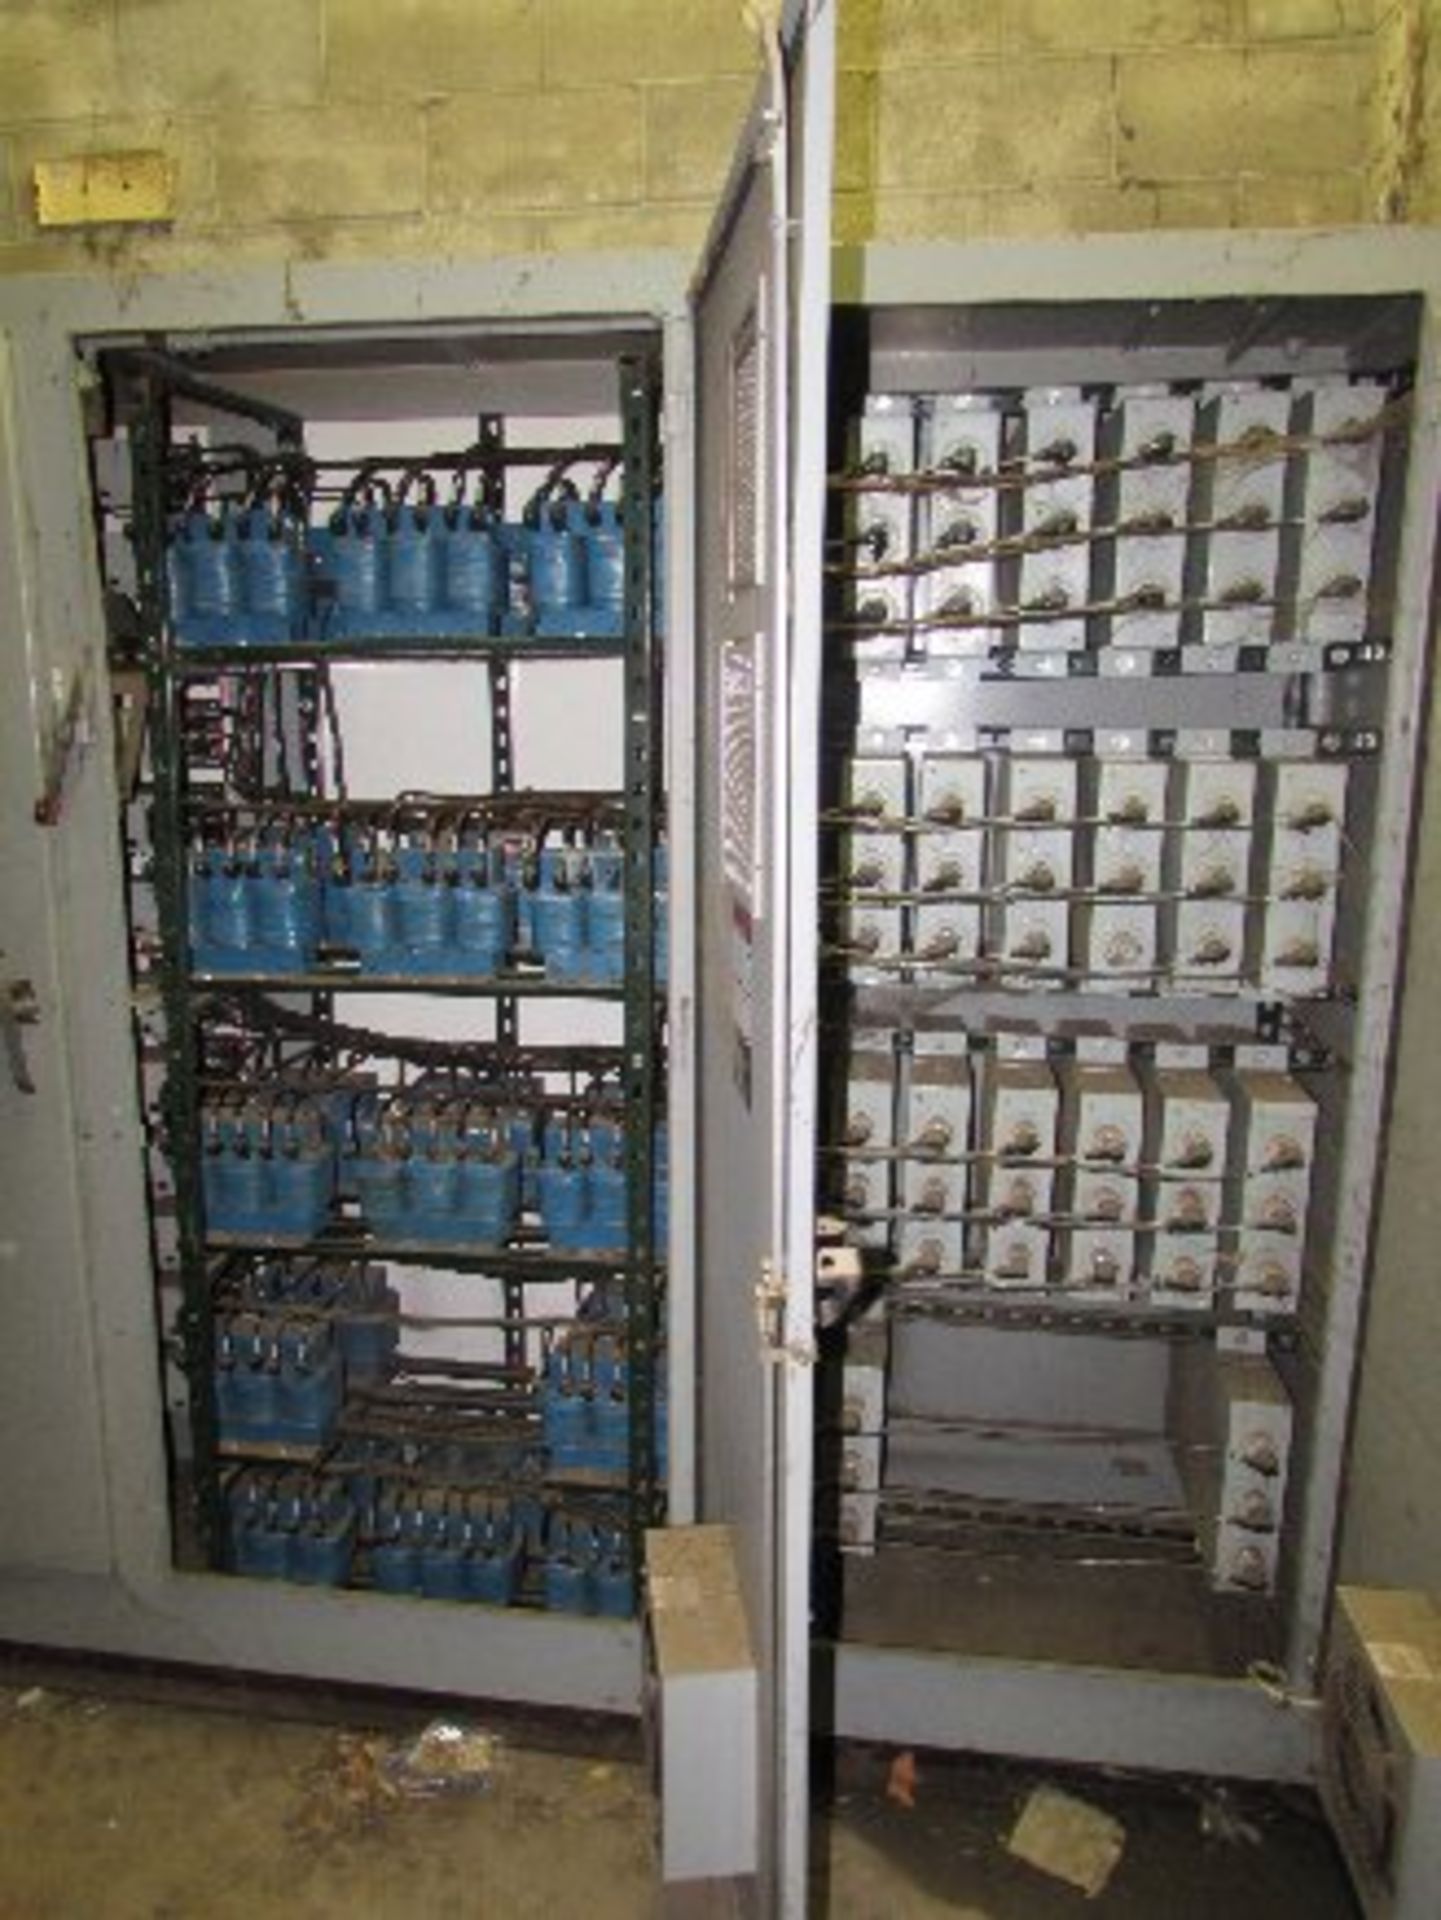 Arco Electric Power Factory Compasidor KVR 1200 , 480 Volts, 60HRz, 3-Phase, 1443.6 AMP, Capacitance - Image 2 of 2